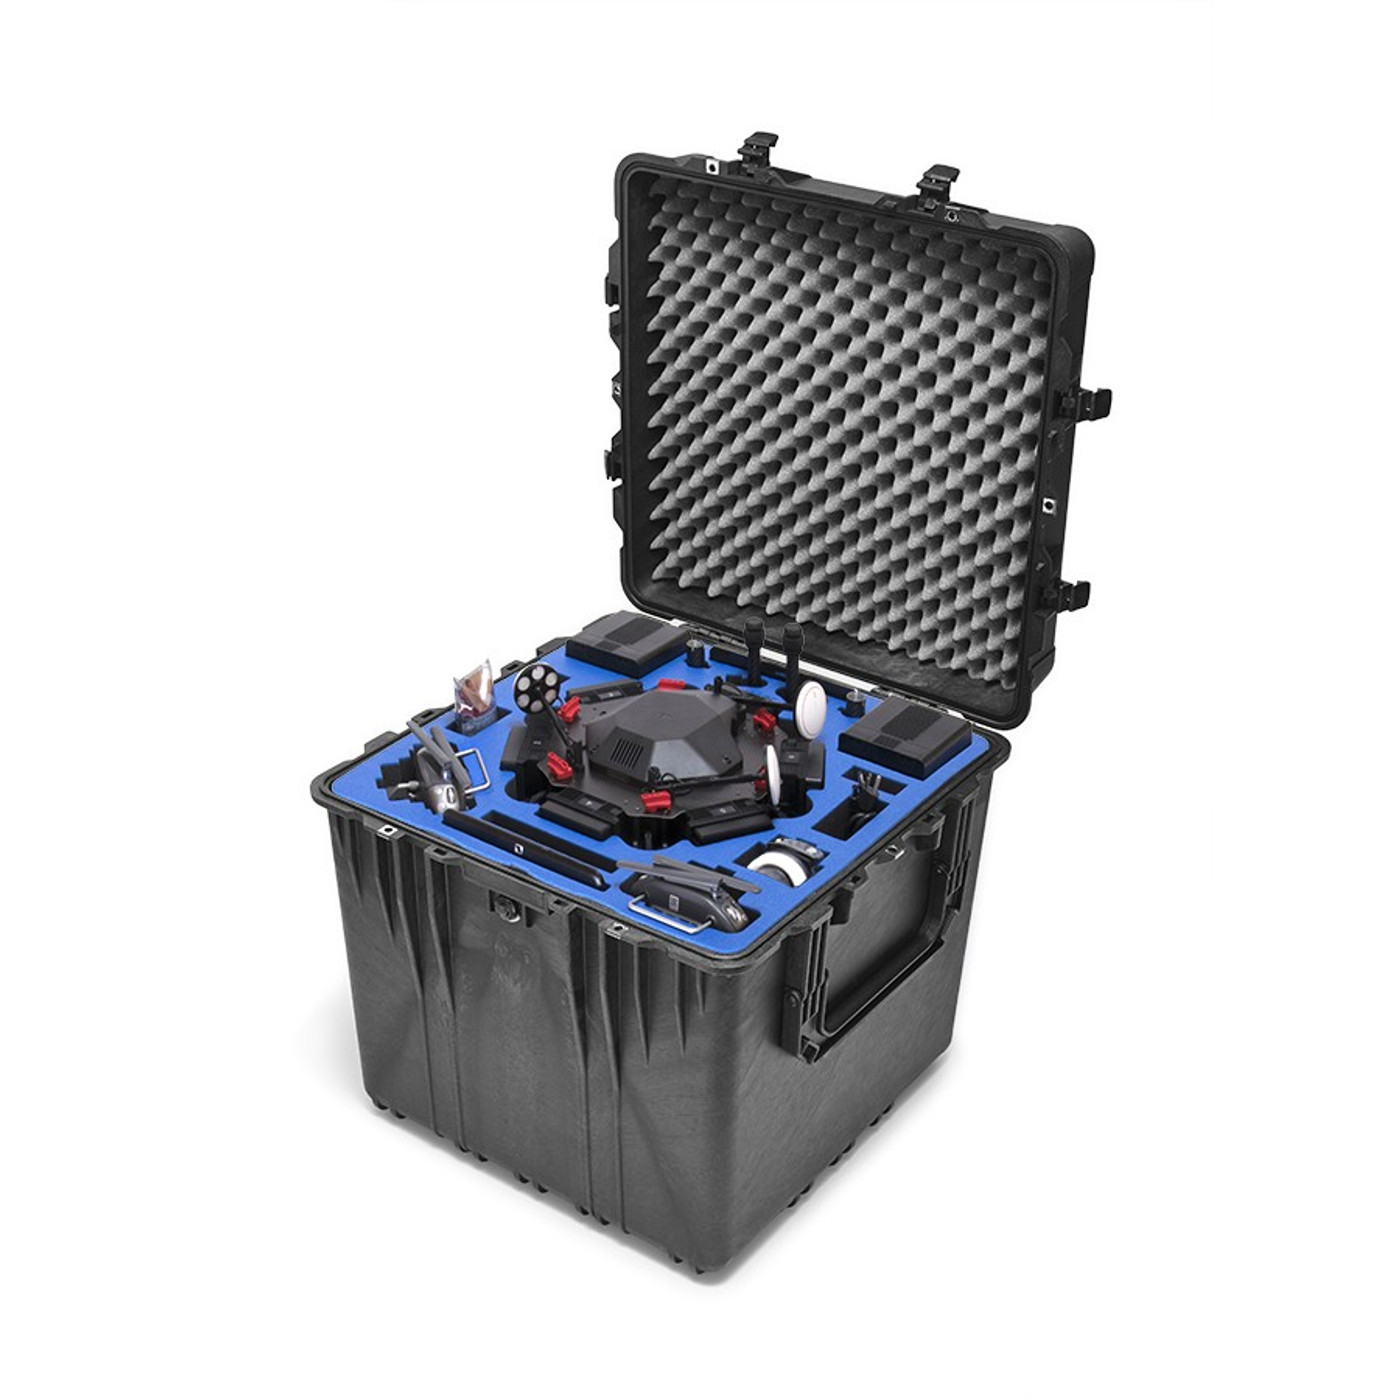 Matrice 600 Pro with Case